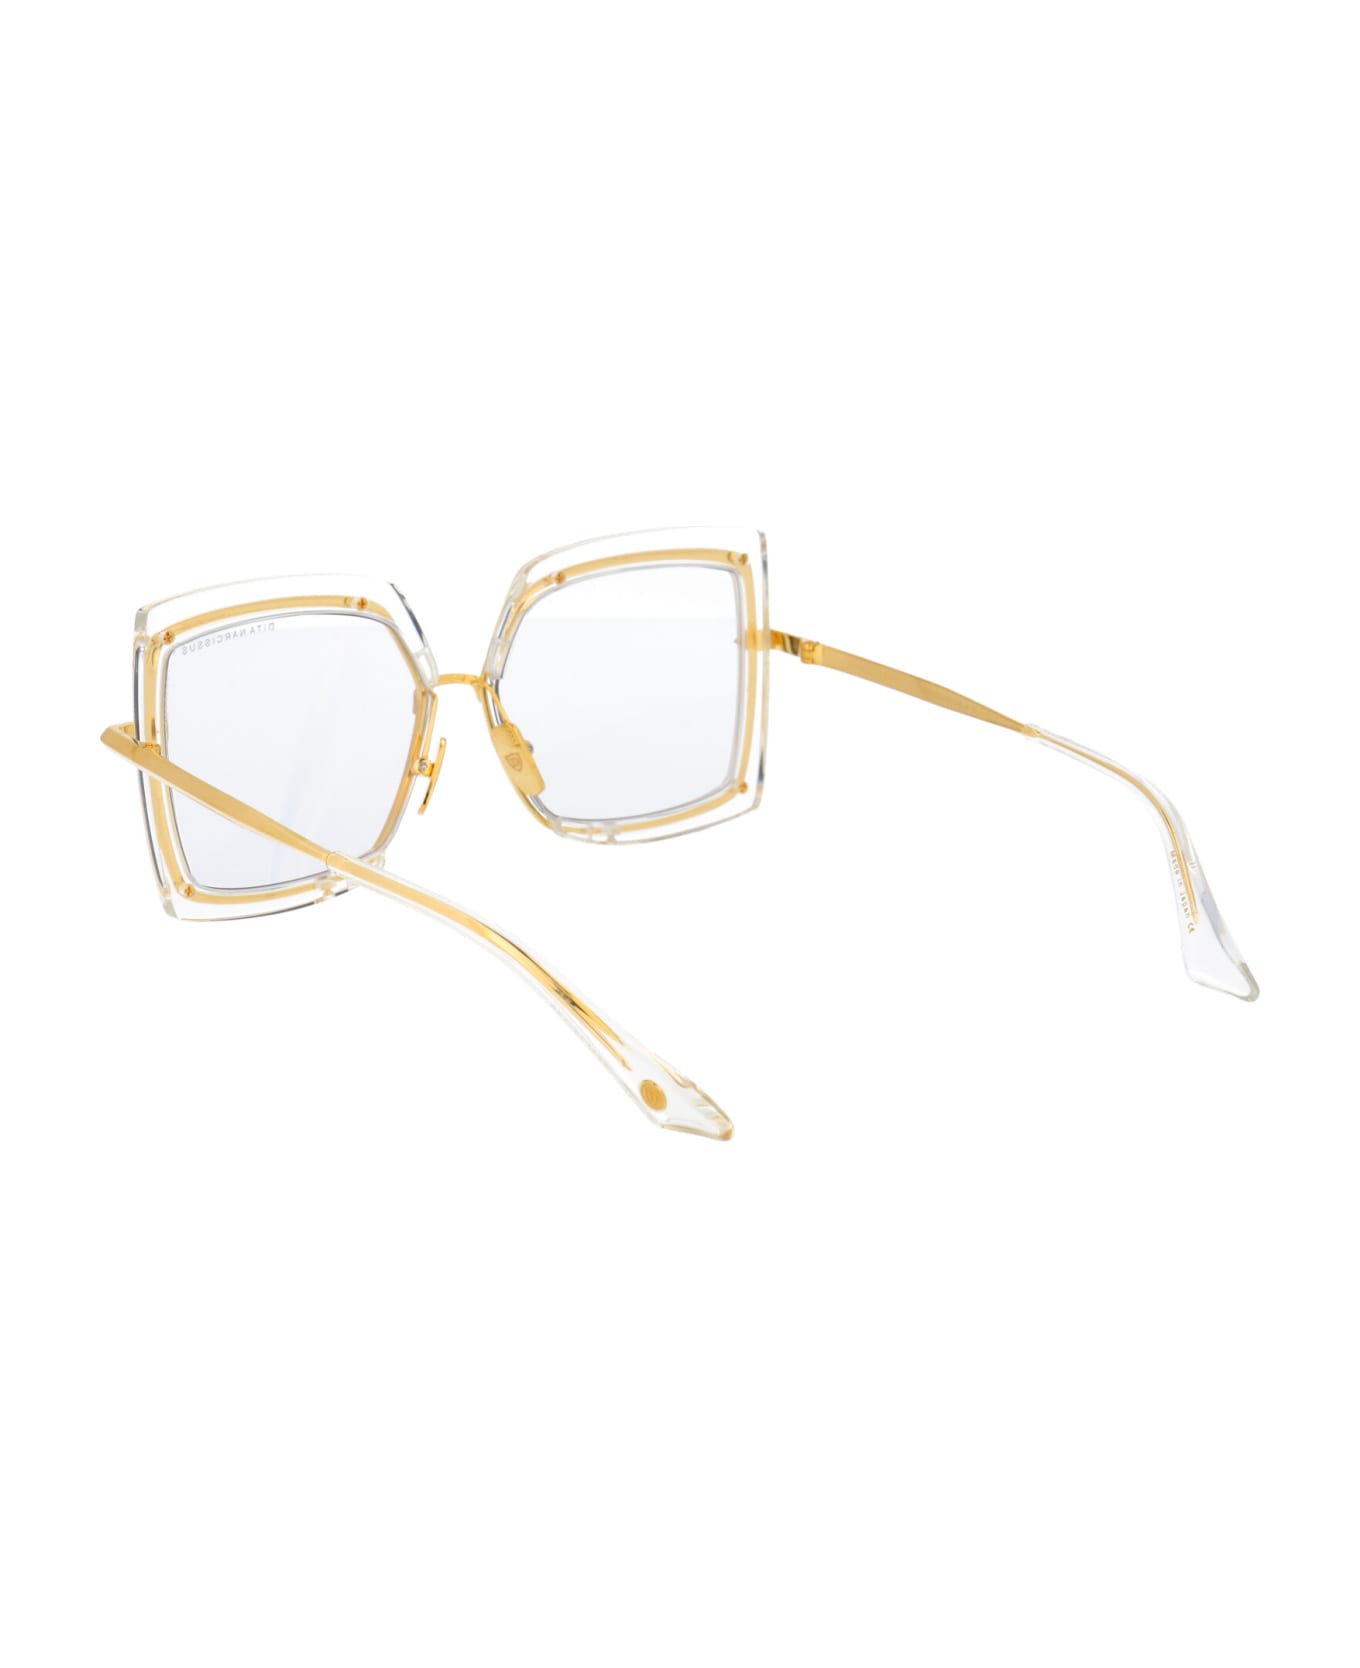 Dita Narcissus Sunglasses - Crystal Clear - Yellow Gold